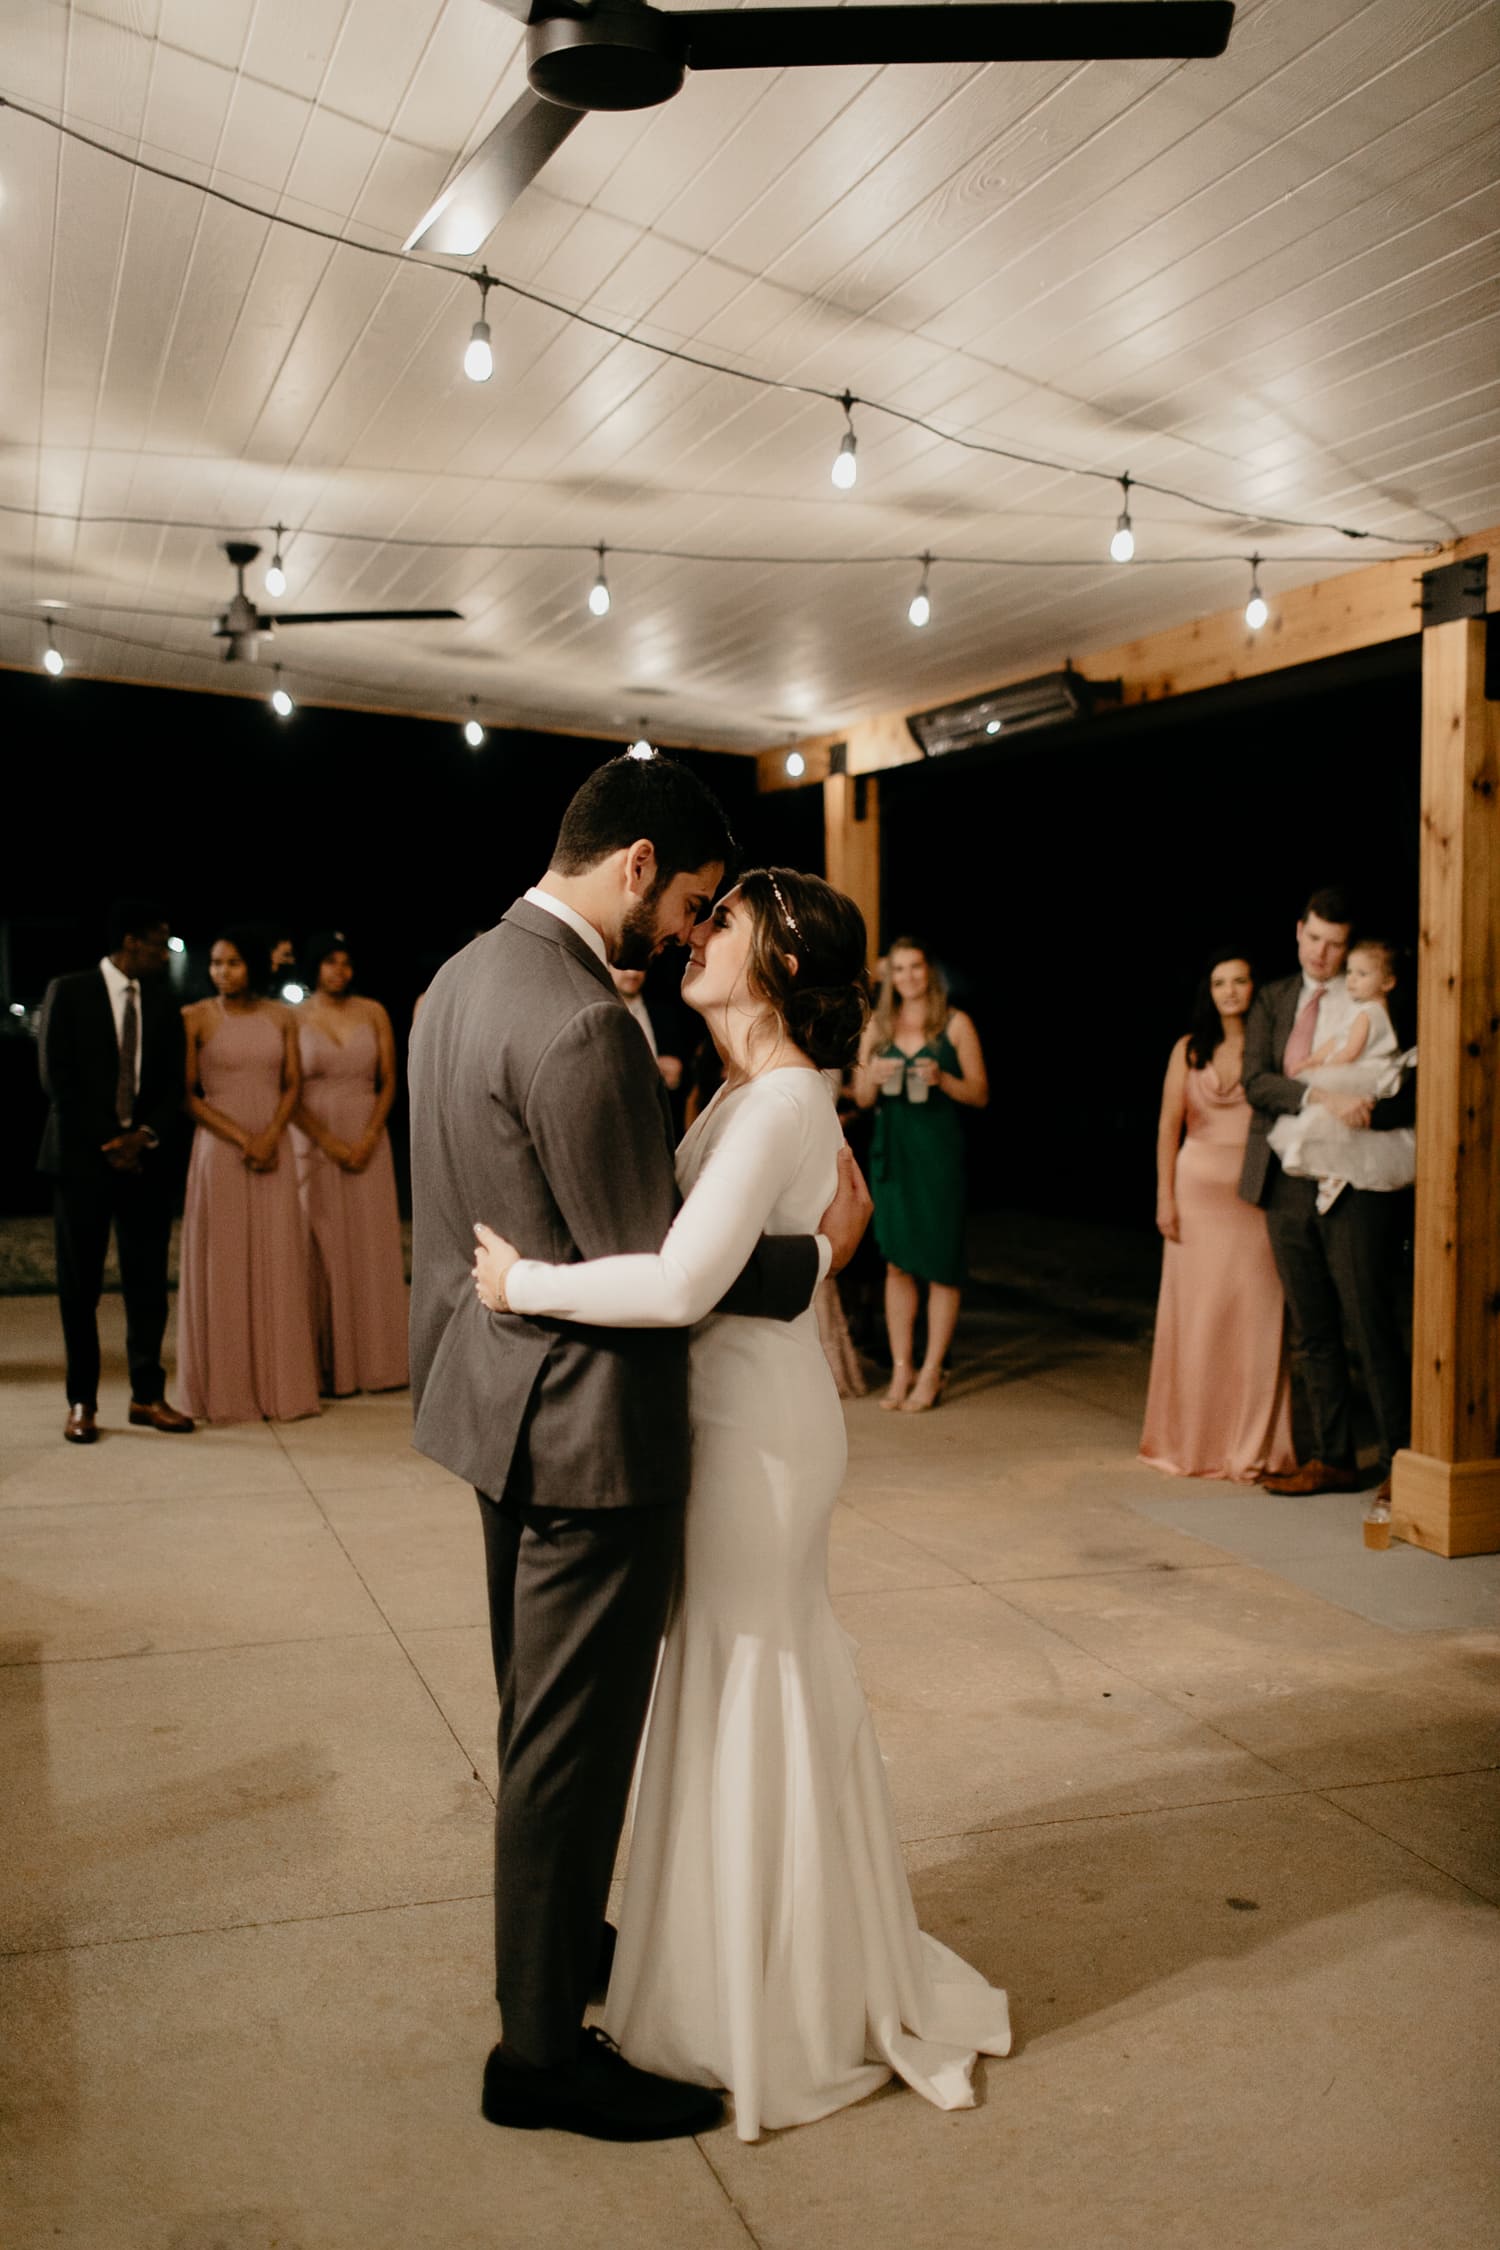 A couple sharing their wedding dance in the outdoor pavilion area at Upstairs Atlanta wedding venue.